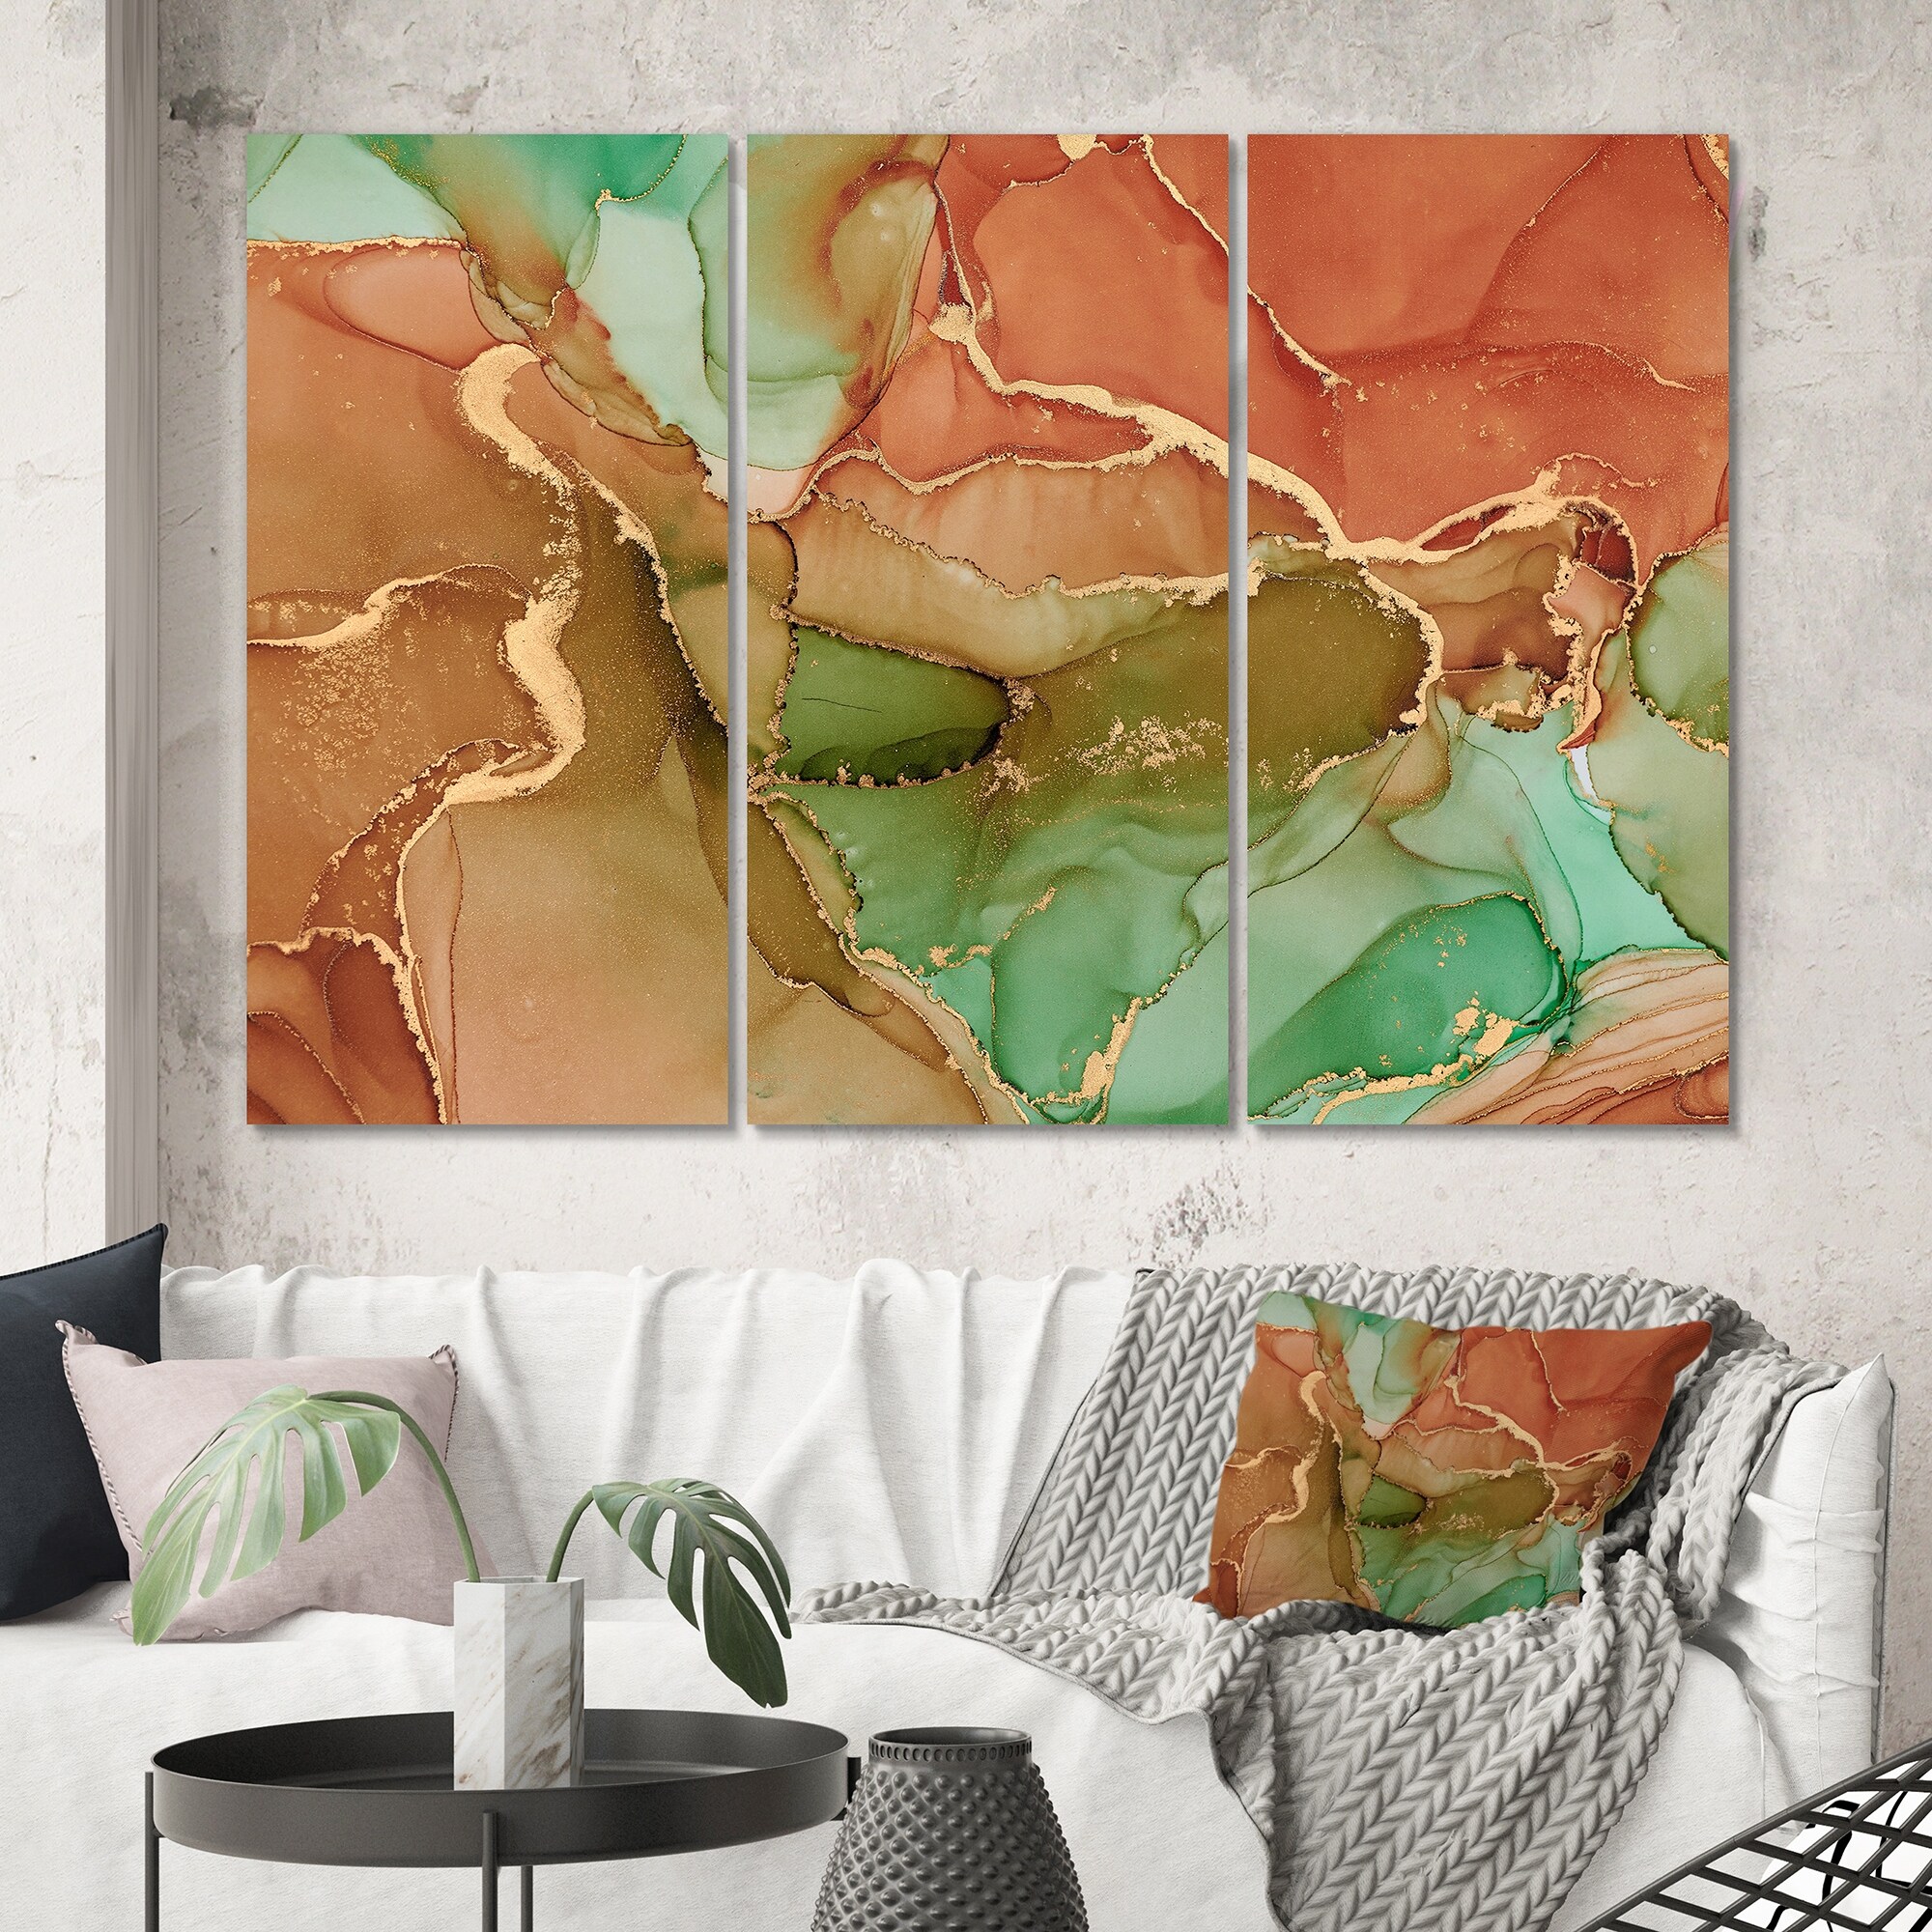 Designart "Turquoise And Brown Luxury Abstract Fluid Art V" Modern Canvas Wall Art Print